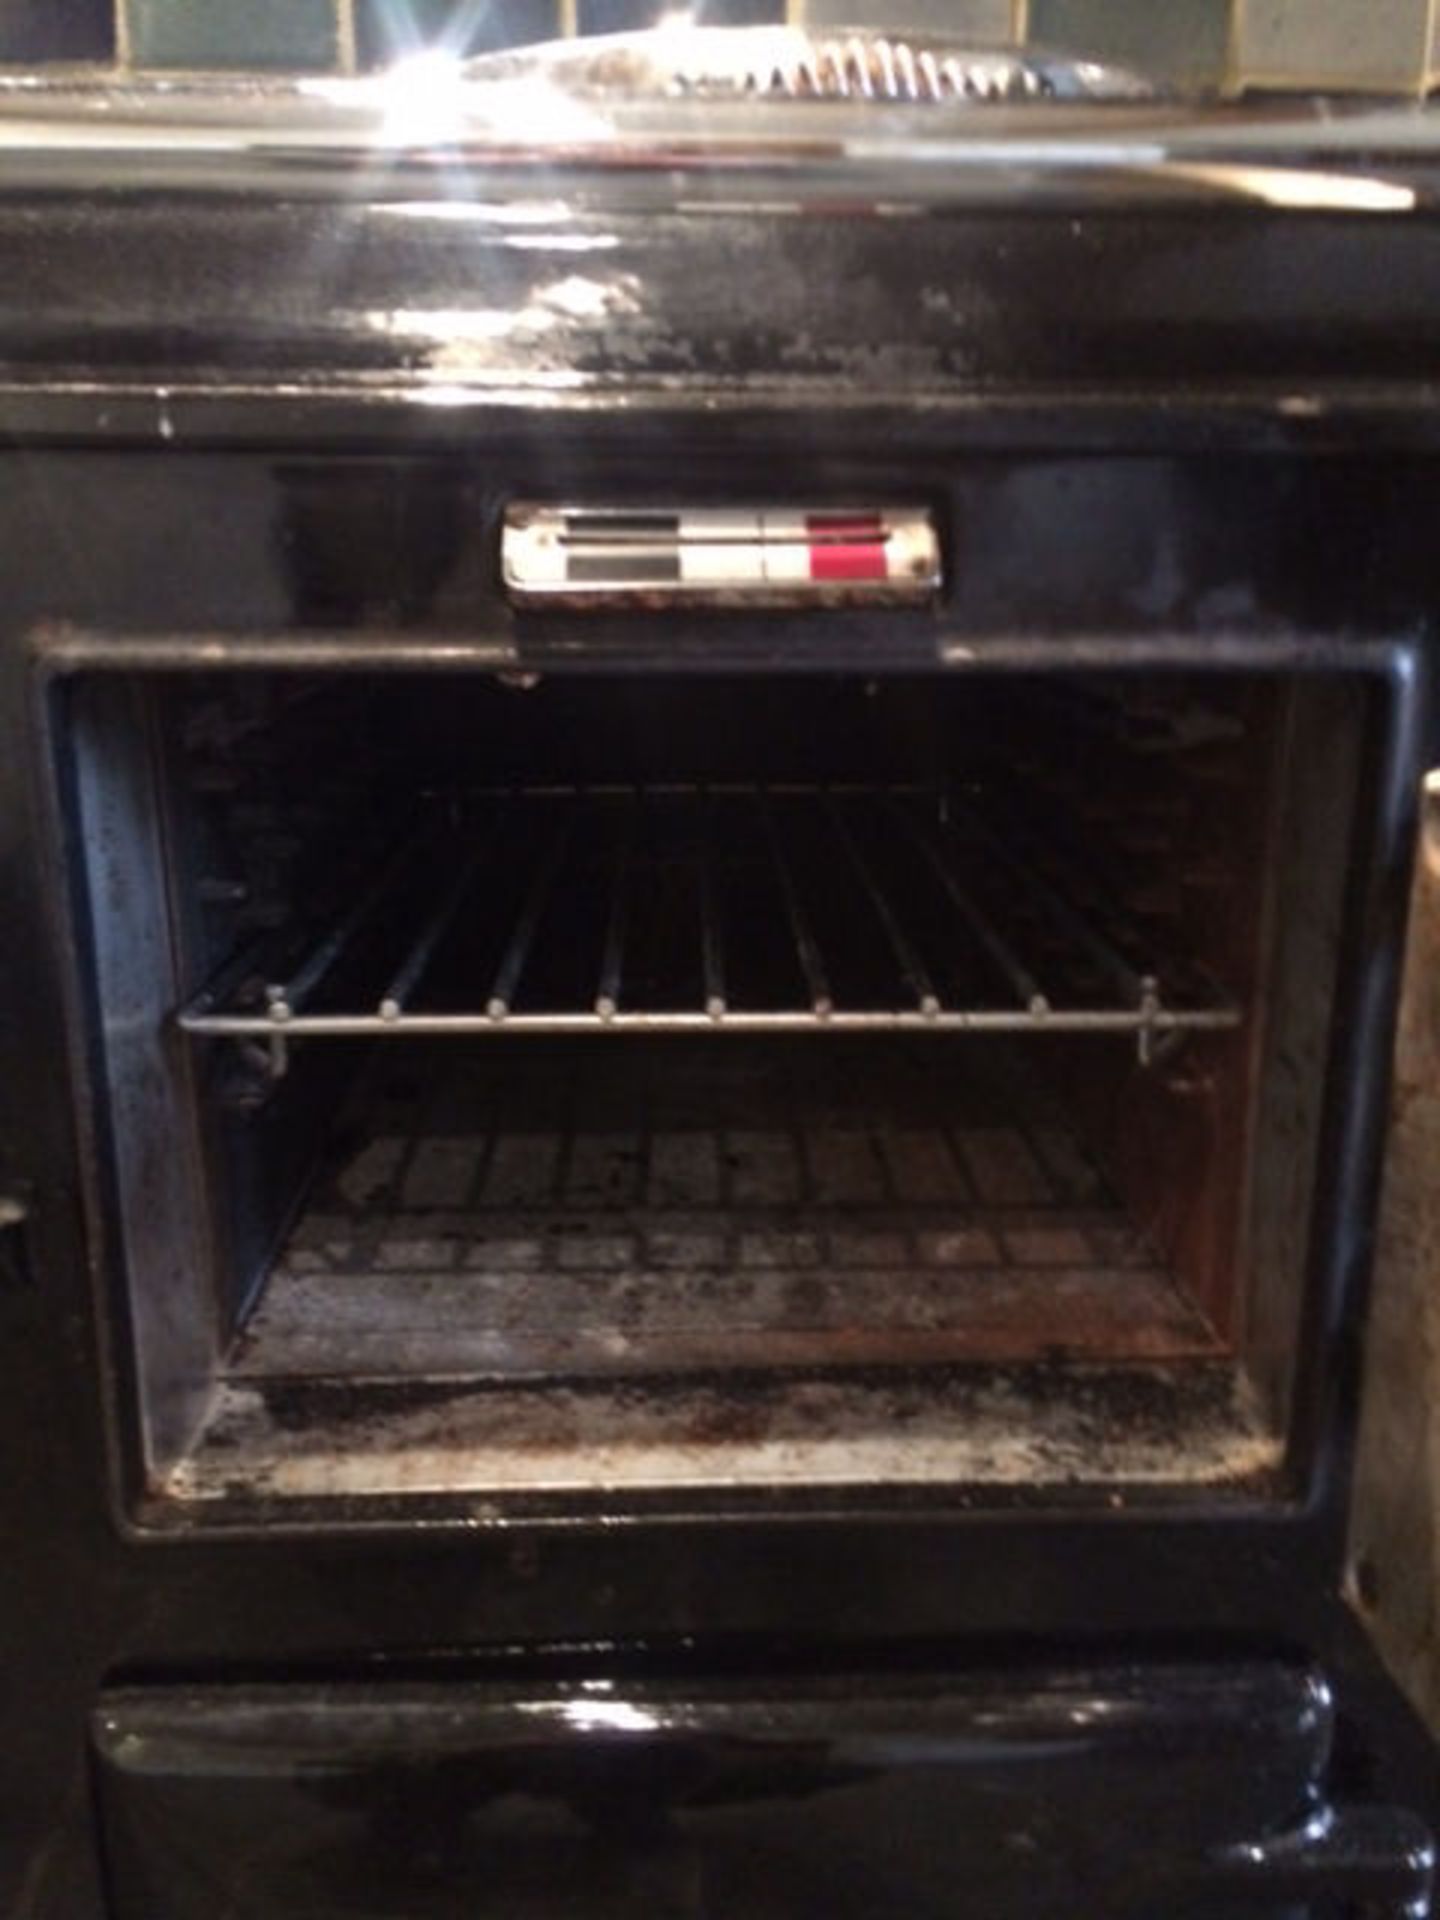 1 x Aga 2-Oven Gas Range Cooker - Cast Iron With Black Enamel Finish - Preowned In Good Working Cond - Image 3 of 10